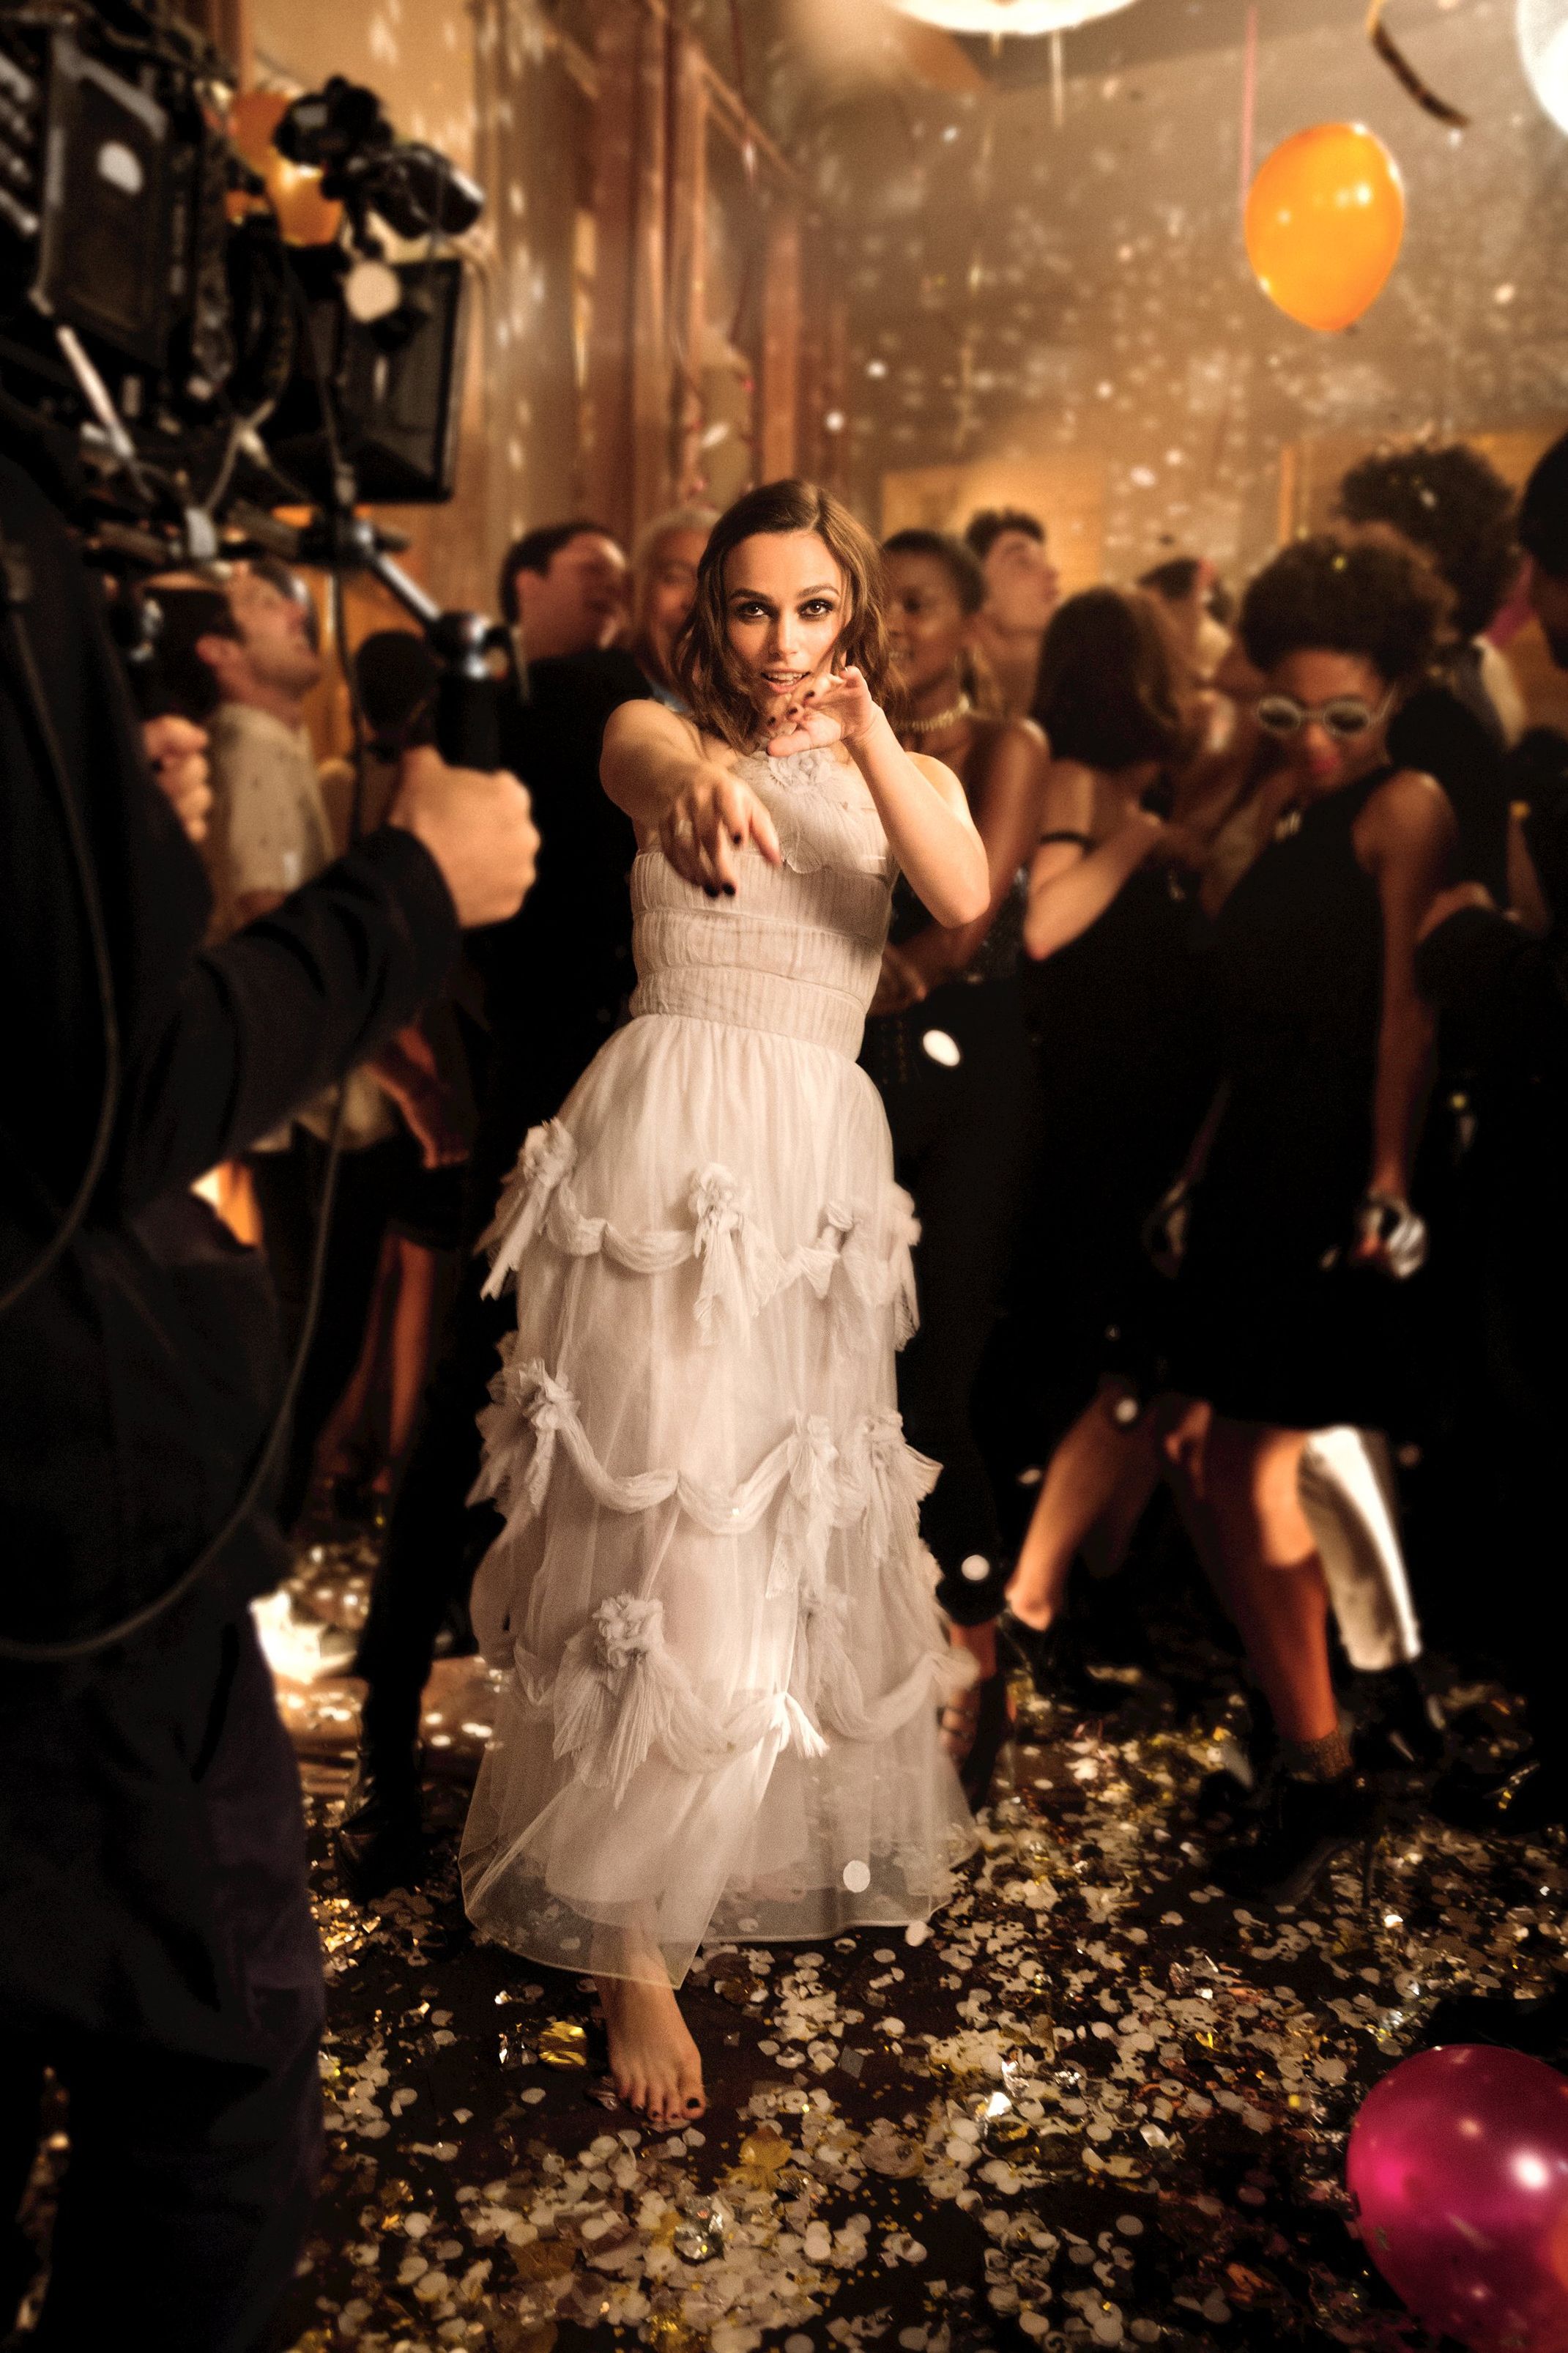 Perfume Shrine Why the new Chanel Coco Mademoiselle commercial with Keira  Knightley in Beige is Ultimately Undewhelming